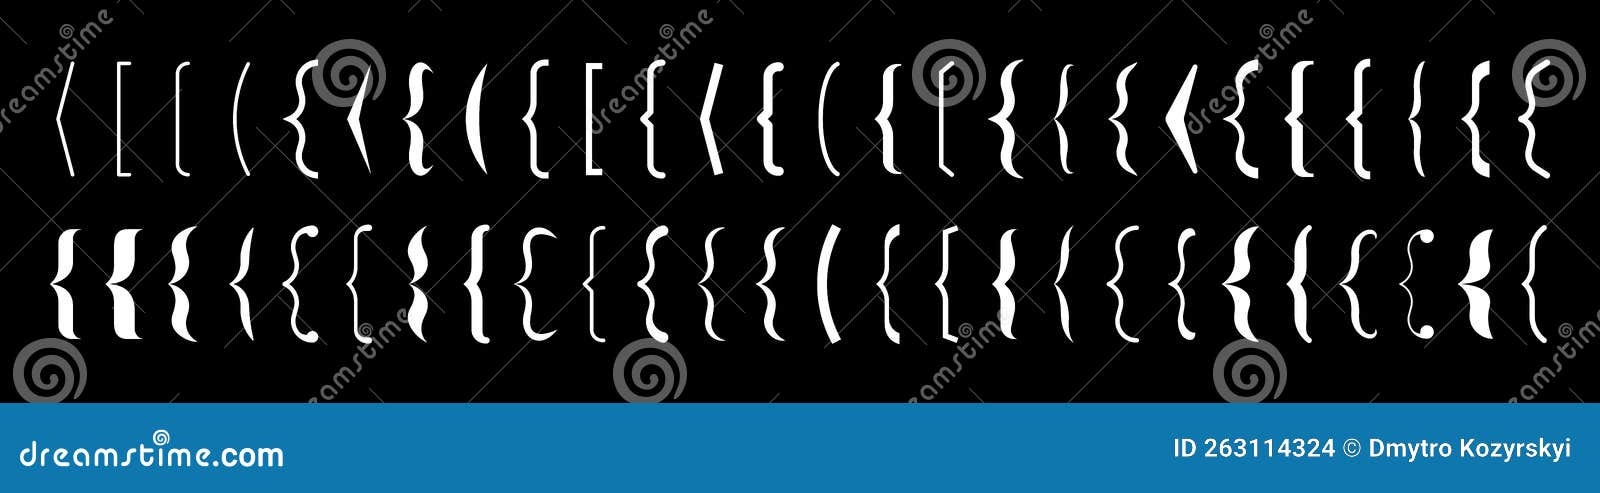 Text brackets vector icon set. Curly braces illustration sign